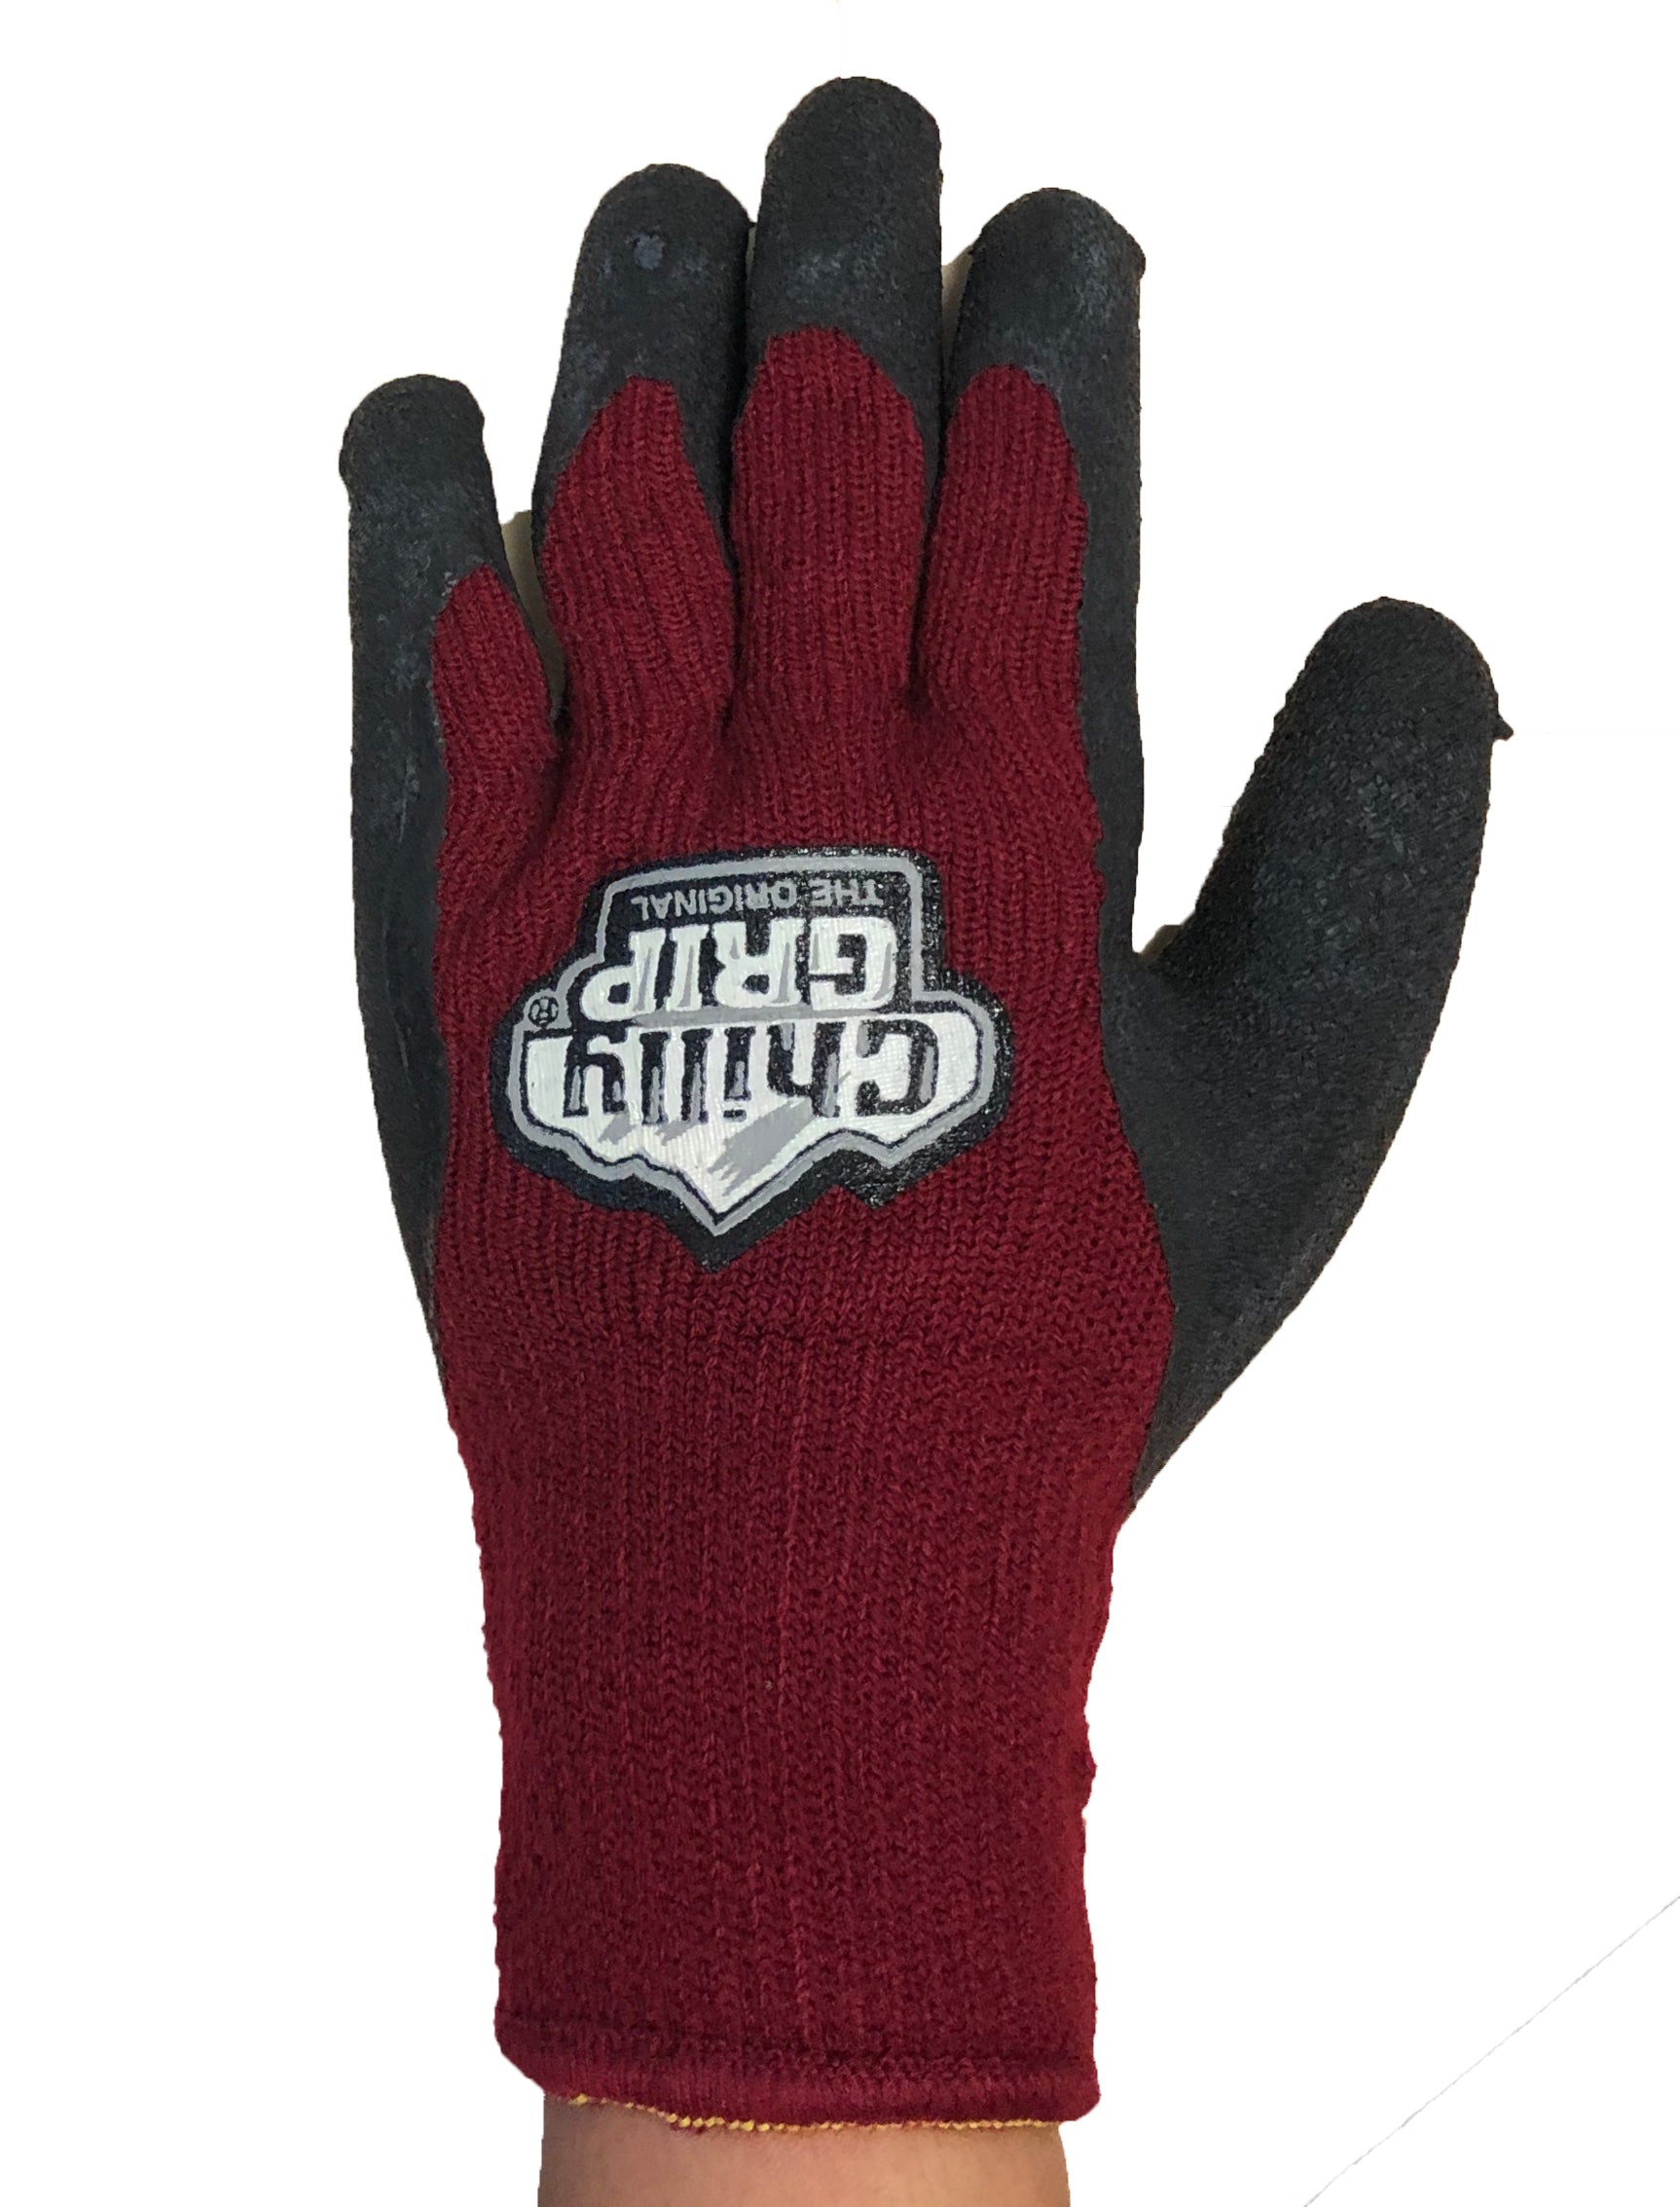 Chilly Grip Red Steer A325 H2O Waterproof Thermal Insulated Gloves, Gr